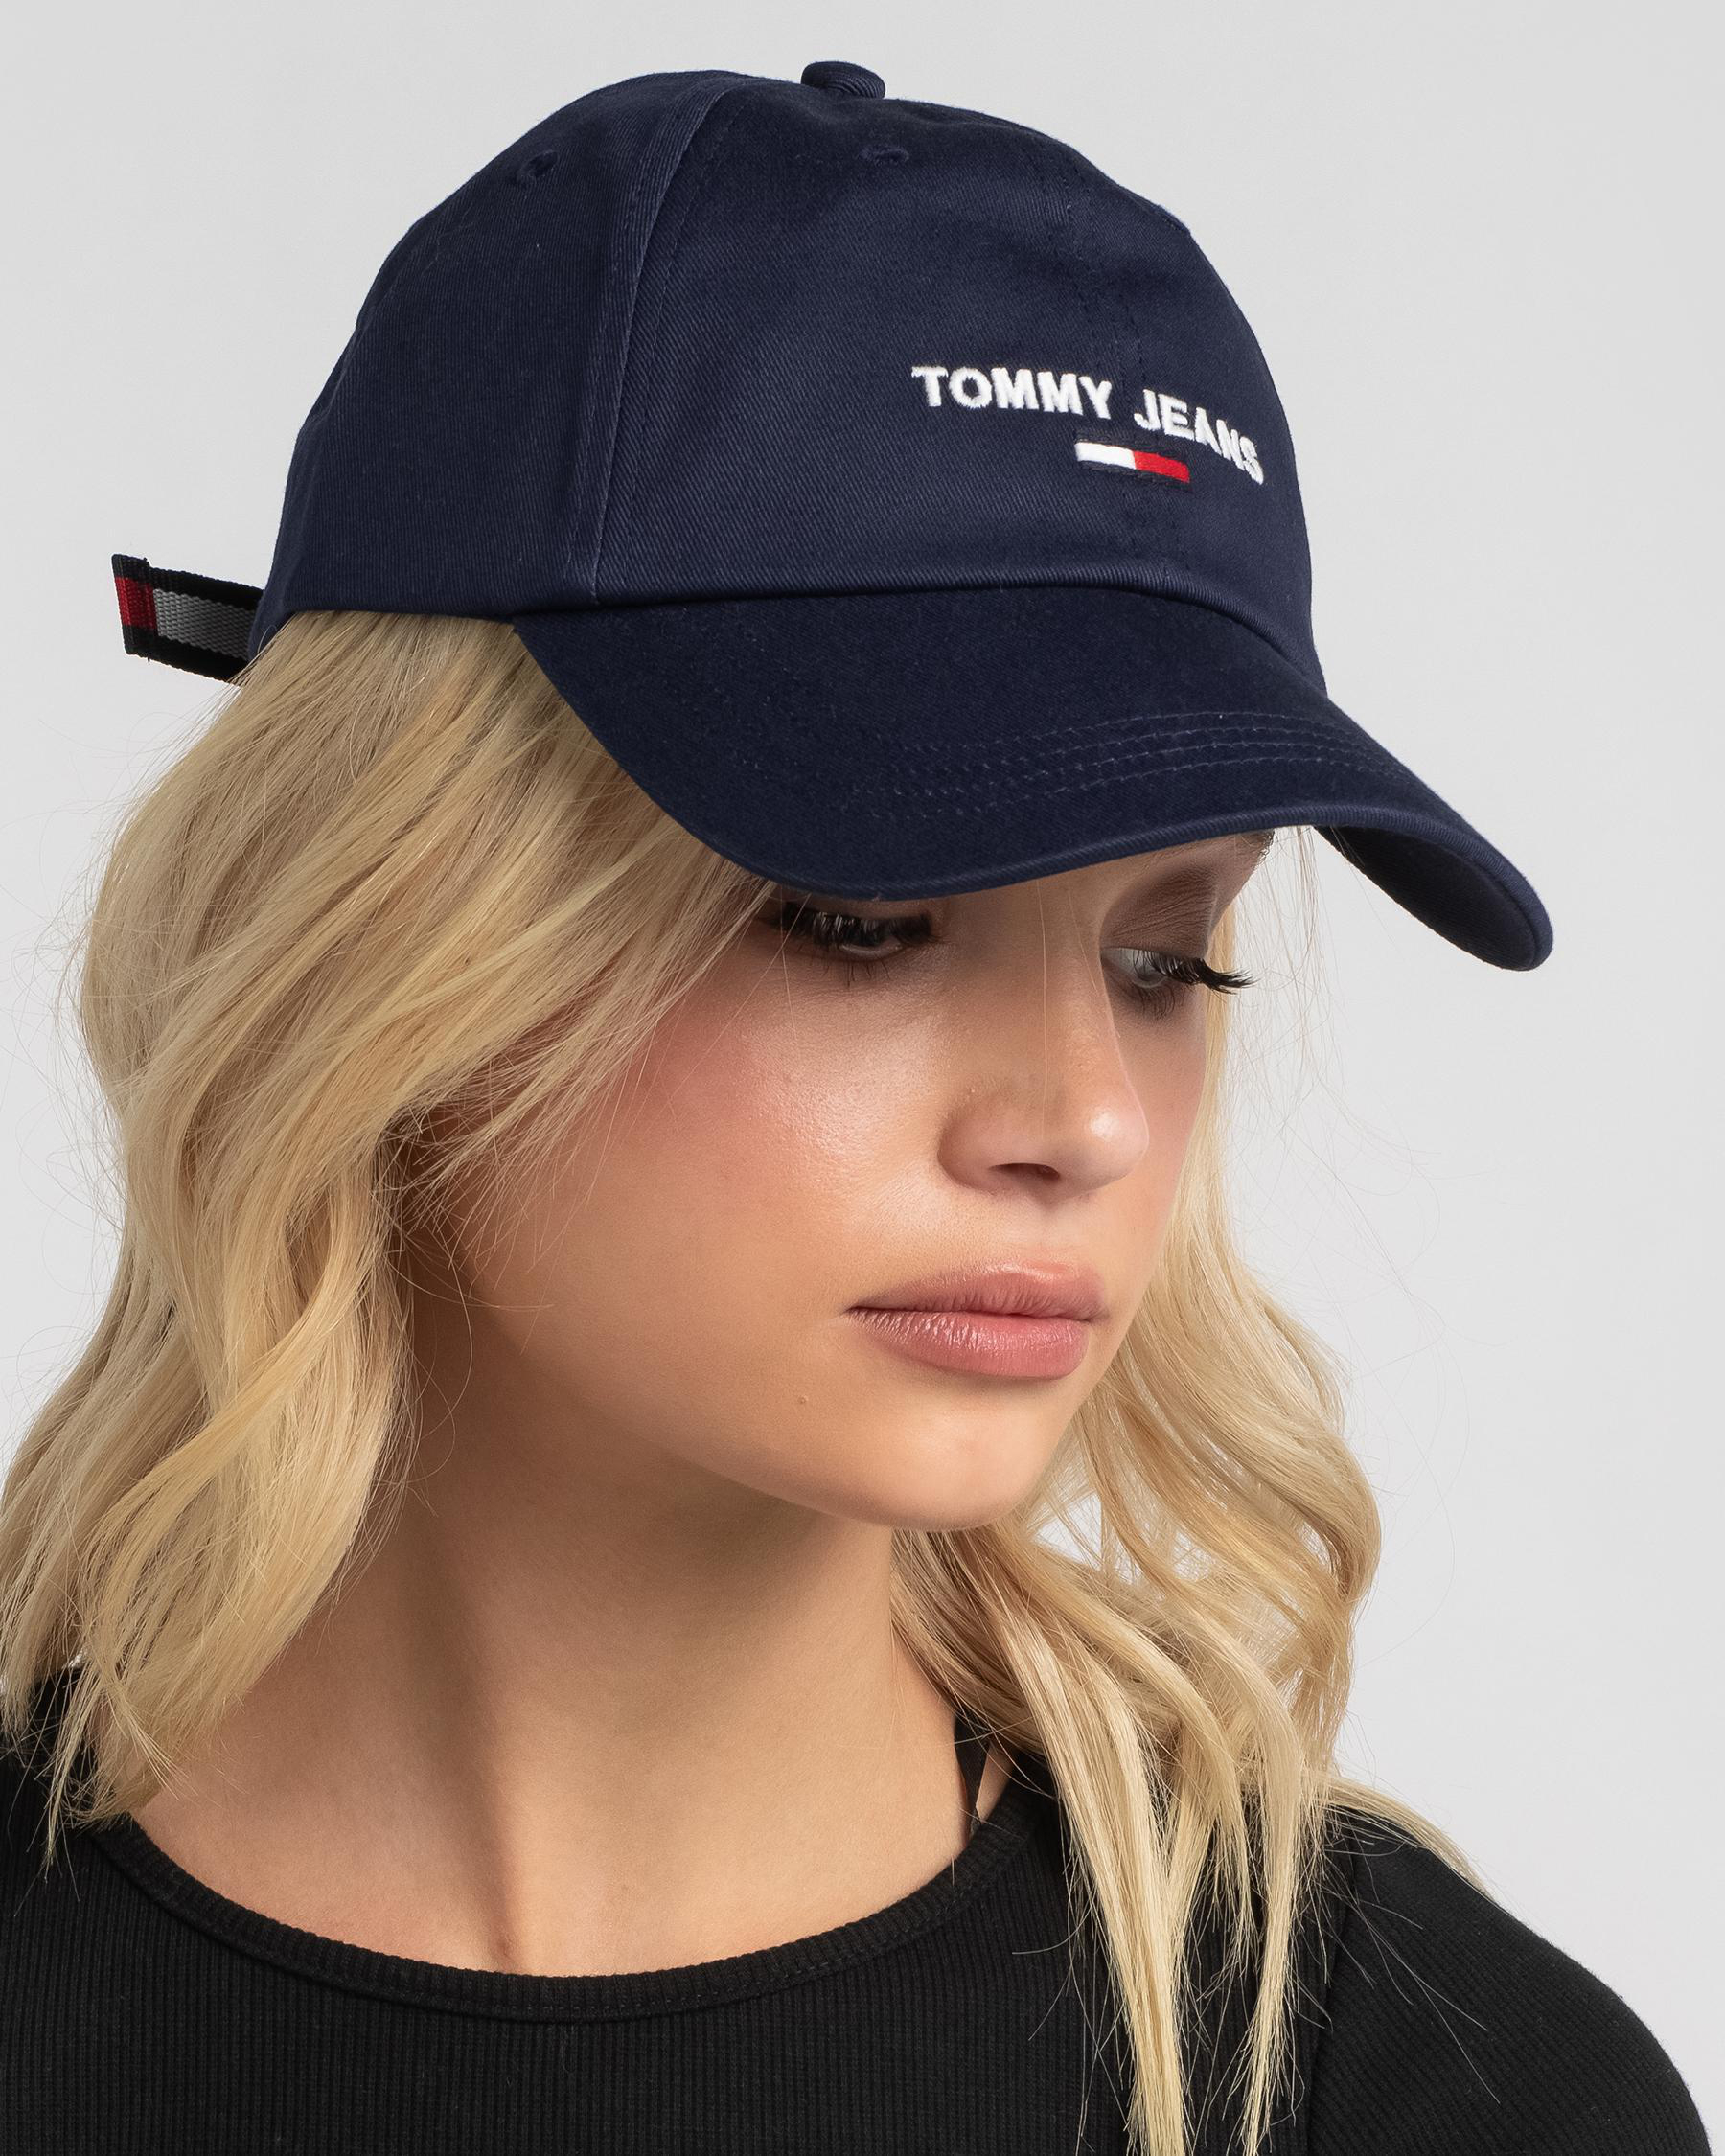 Tommy Hilfiger Sport - City Navy United In Twilight Beach & Shipping States Easy - FREE* Returns Cap